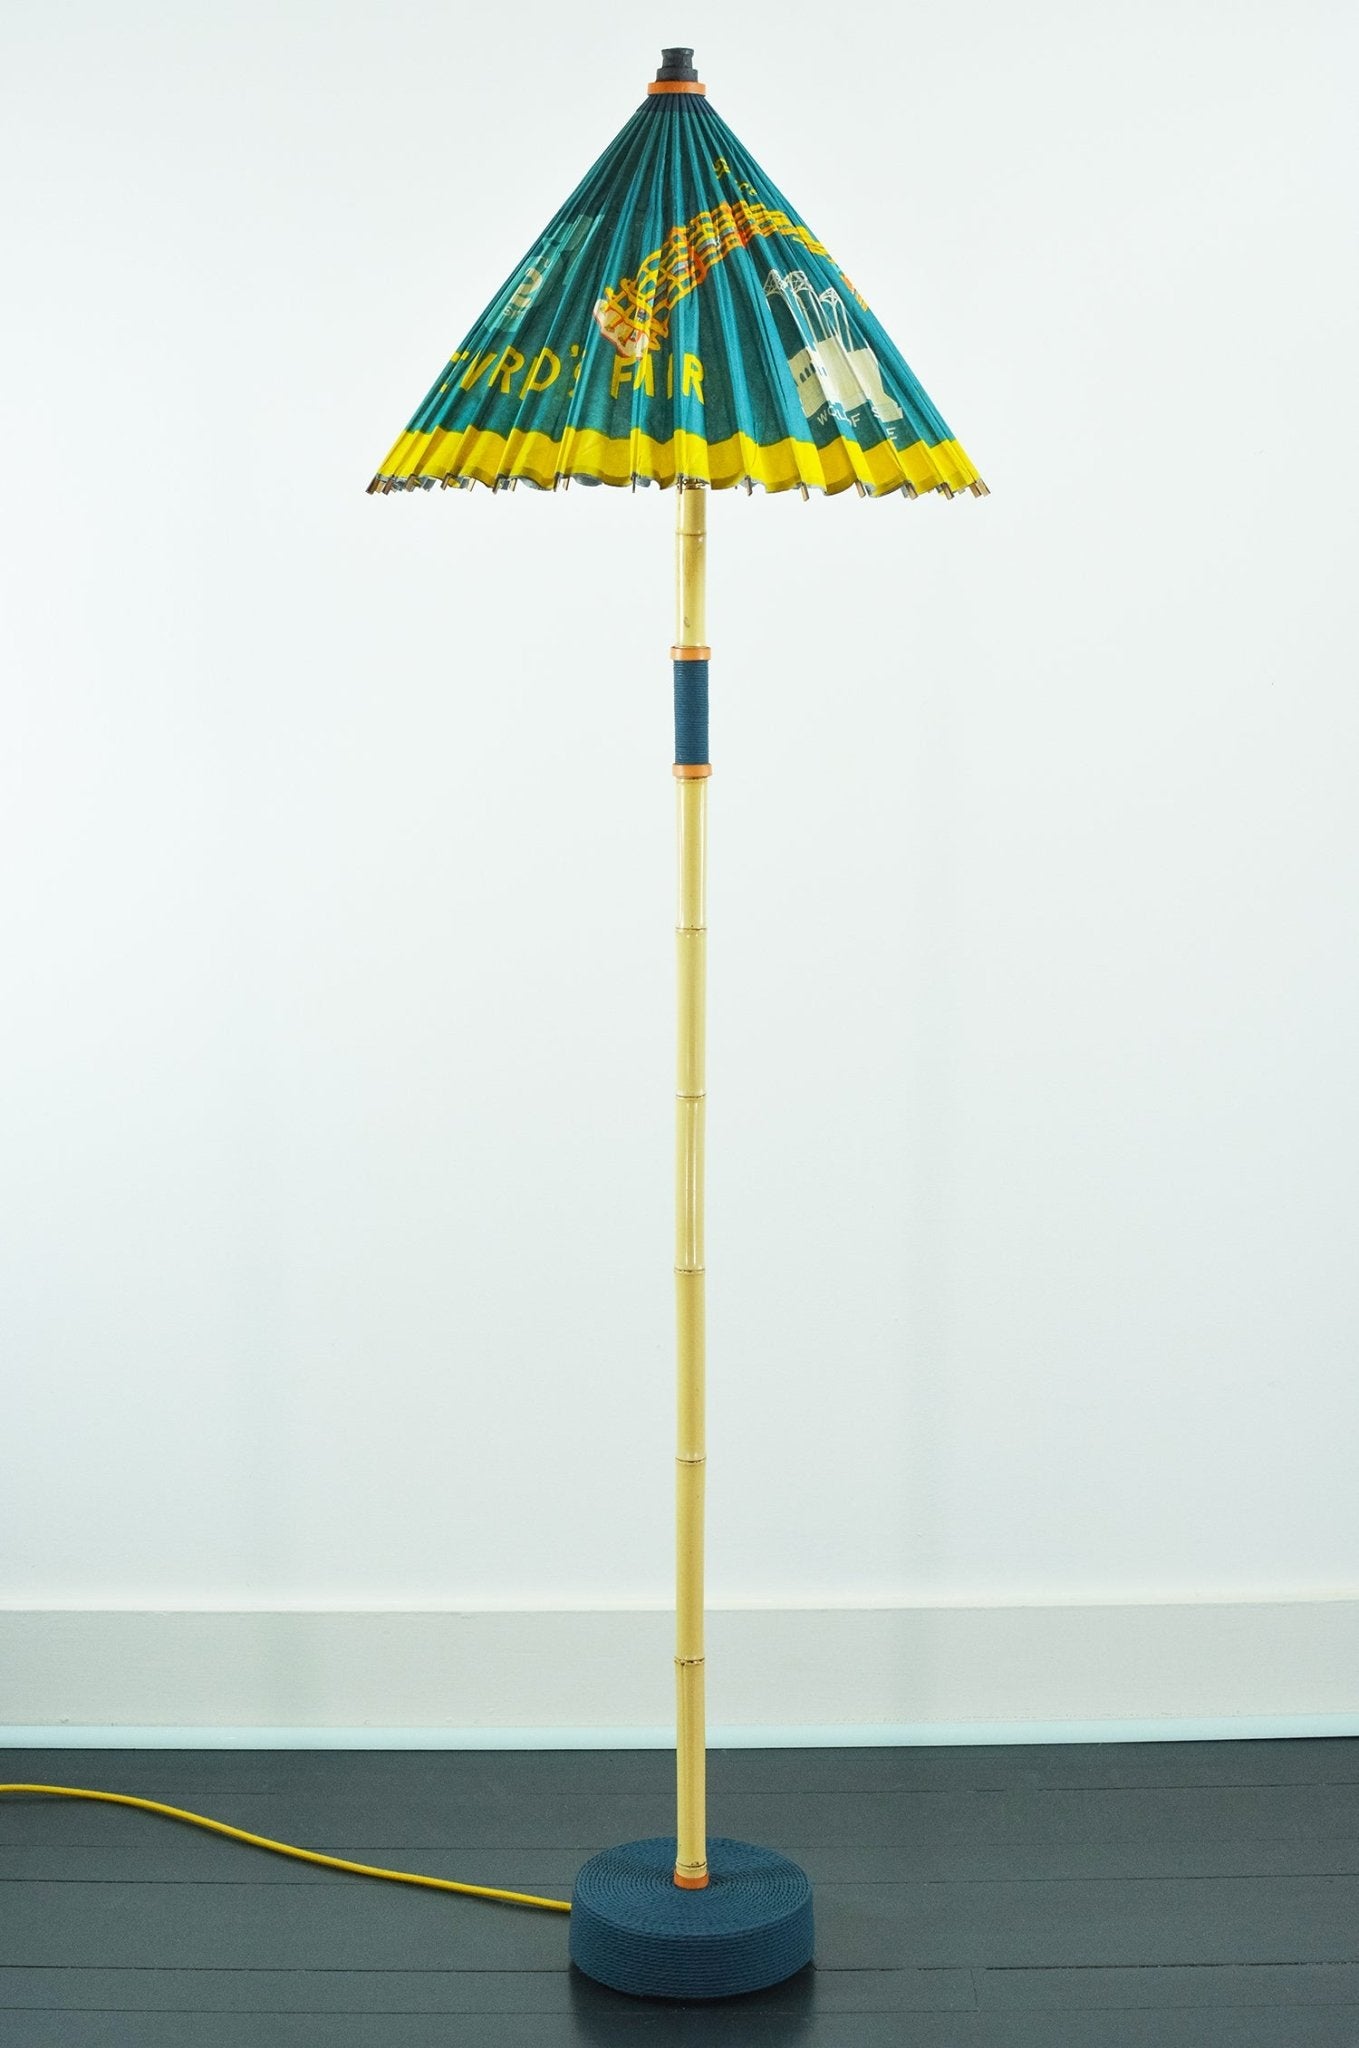 1962 Seattle 'World's Fair' Bamboo Floor Lamp with Parasol Shade and Coiled Seagrass Base — Model No. 002 - Tennant New York